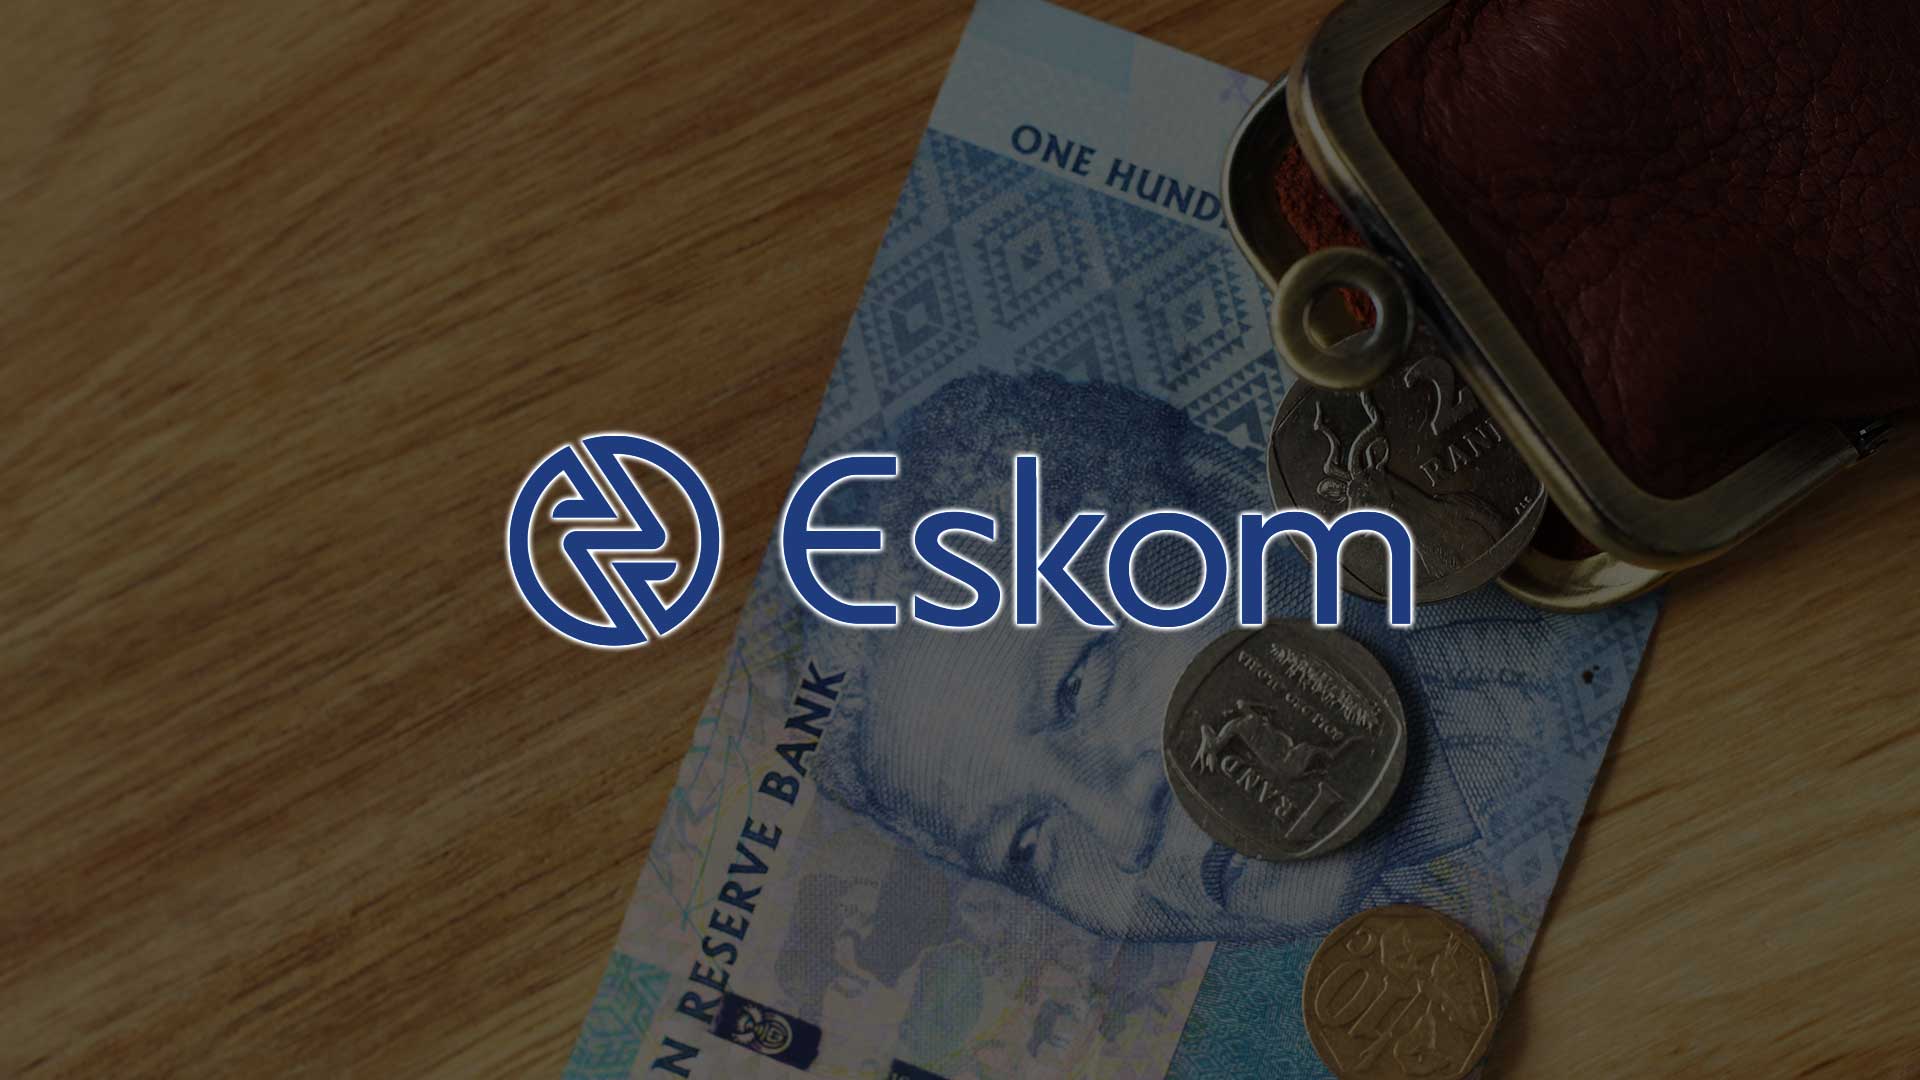 Upcoming Adjustments to Eskom's Electricity Prices